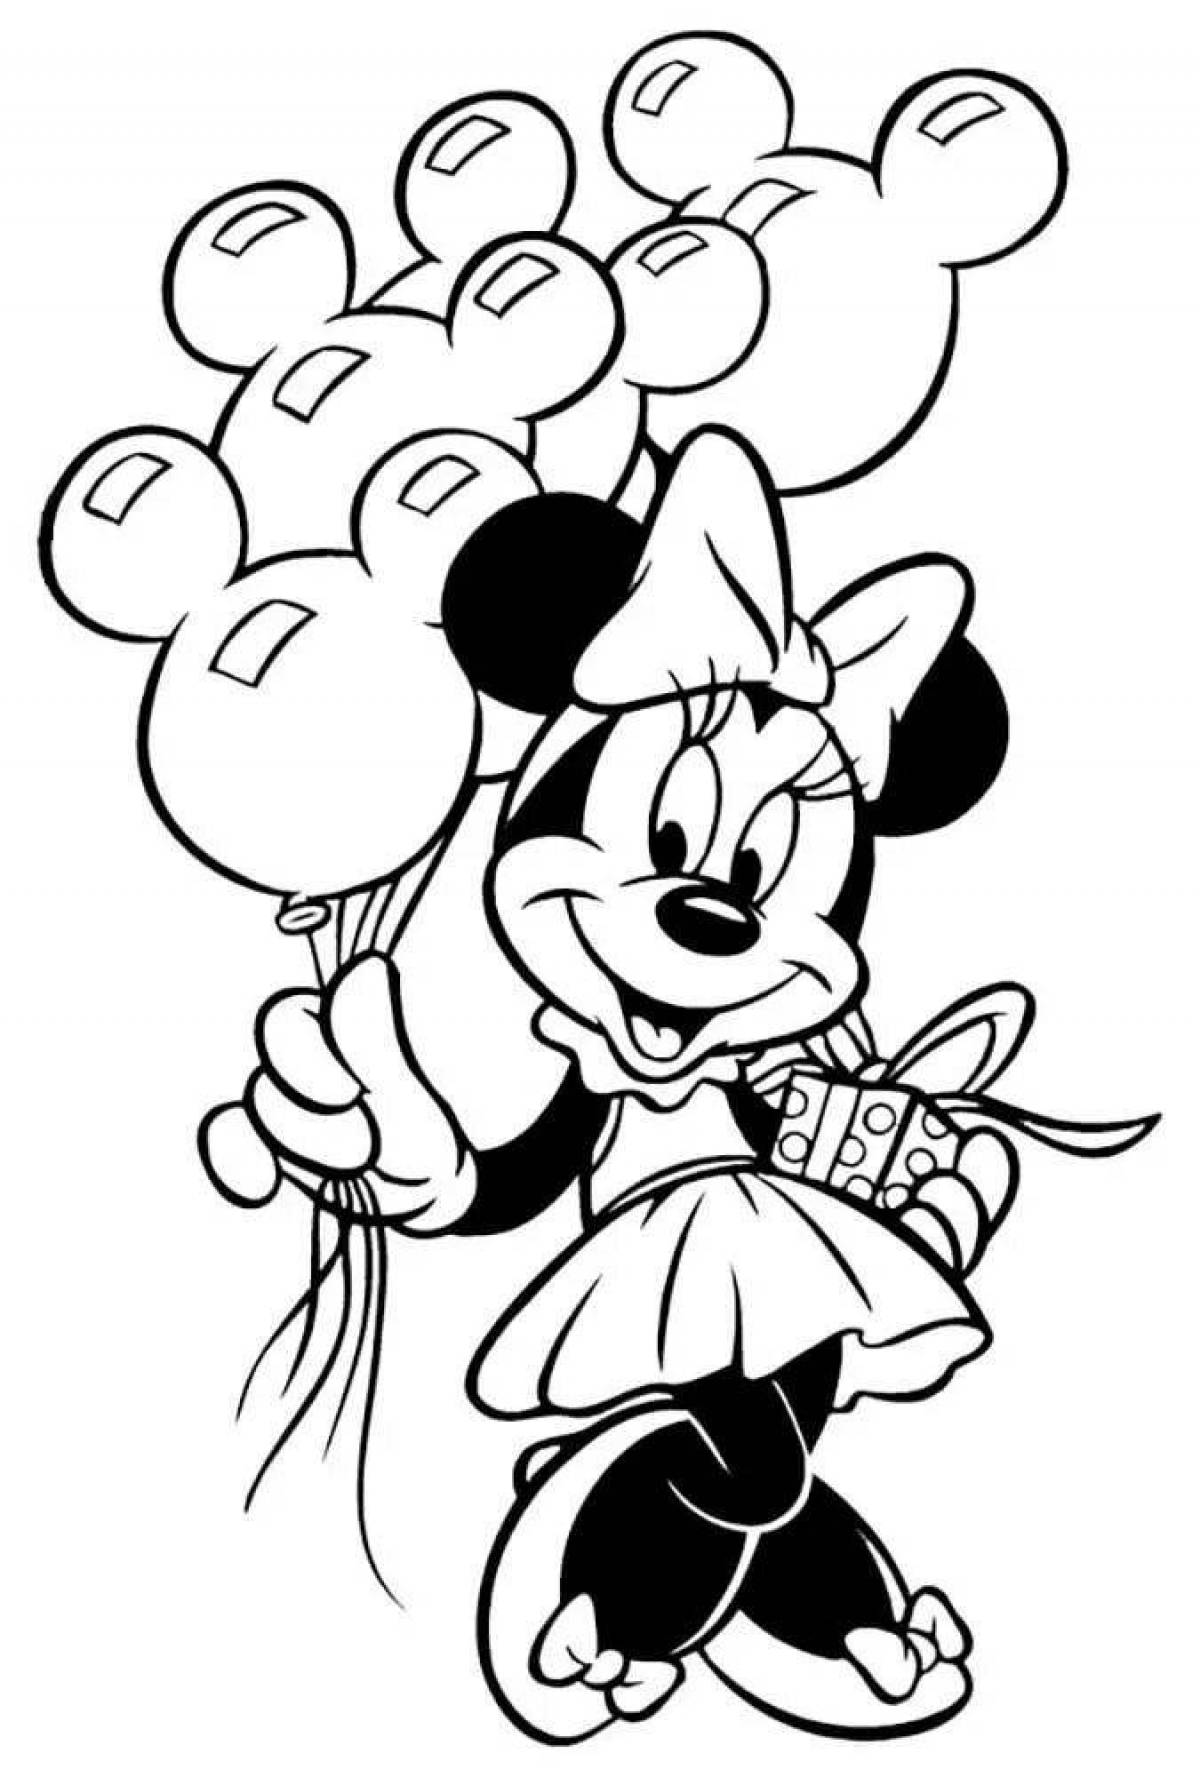 Glowing minnie mouse coloring page